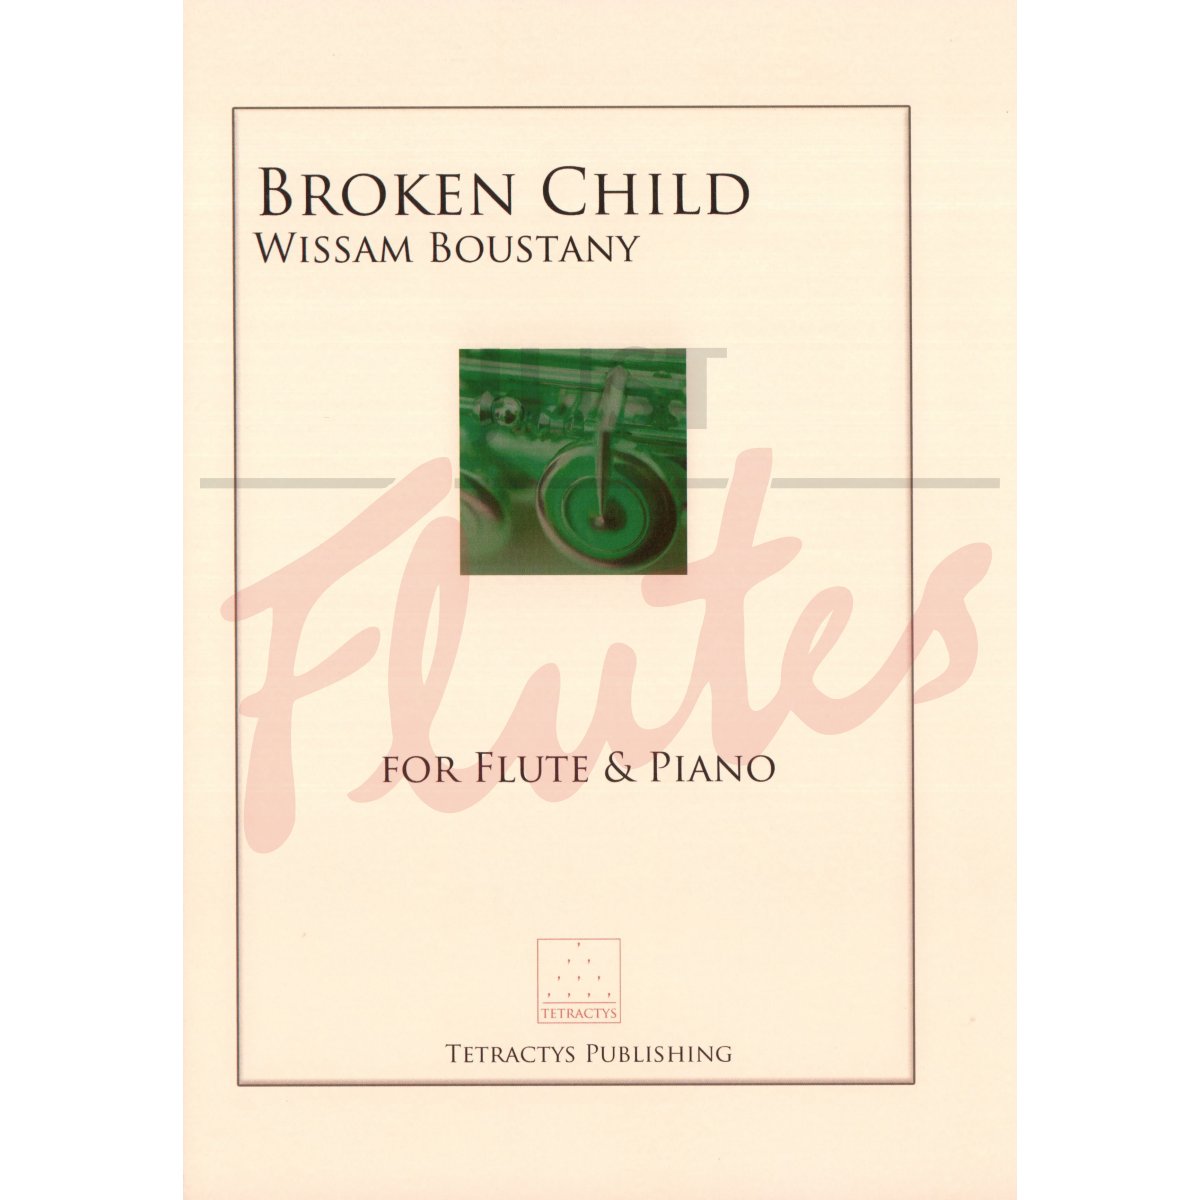 Broken Child for Flute and Piano